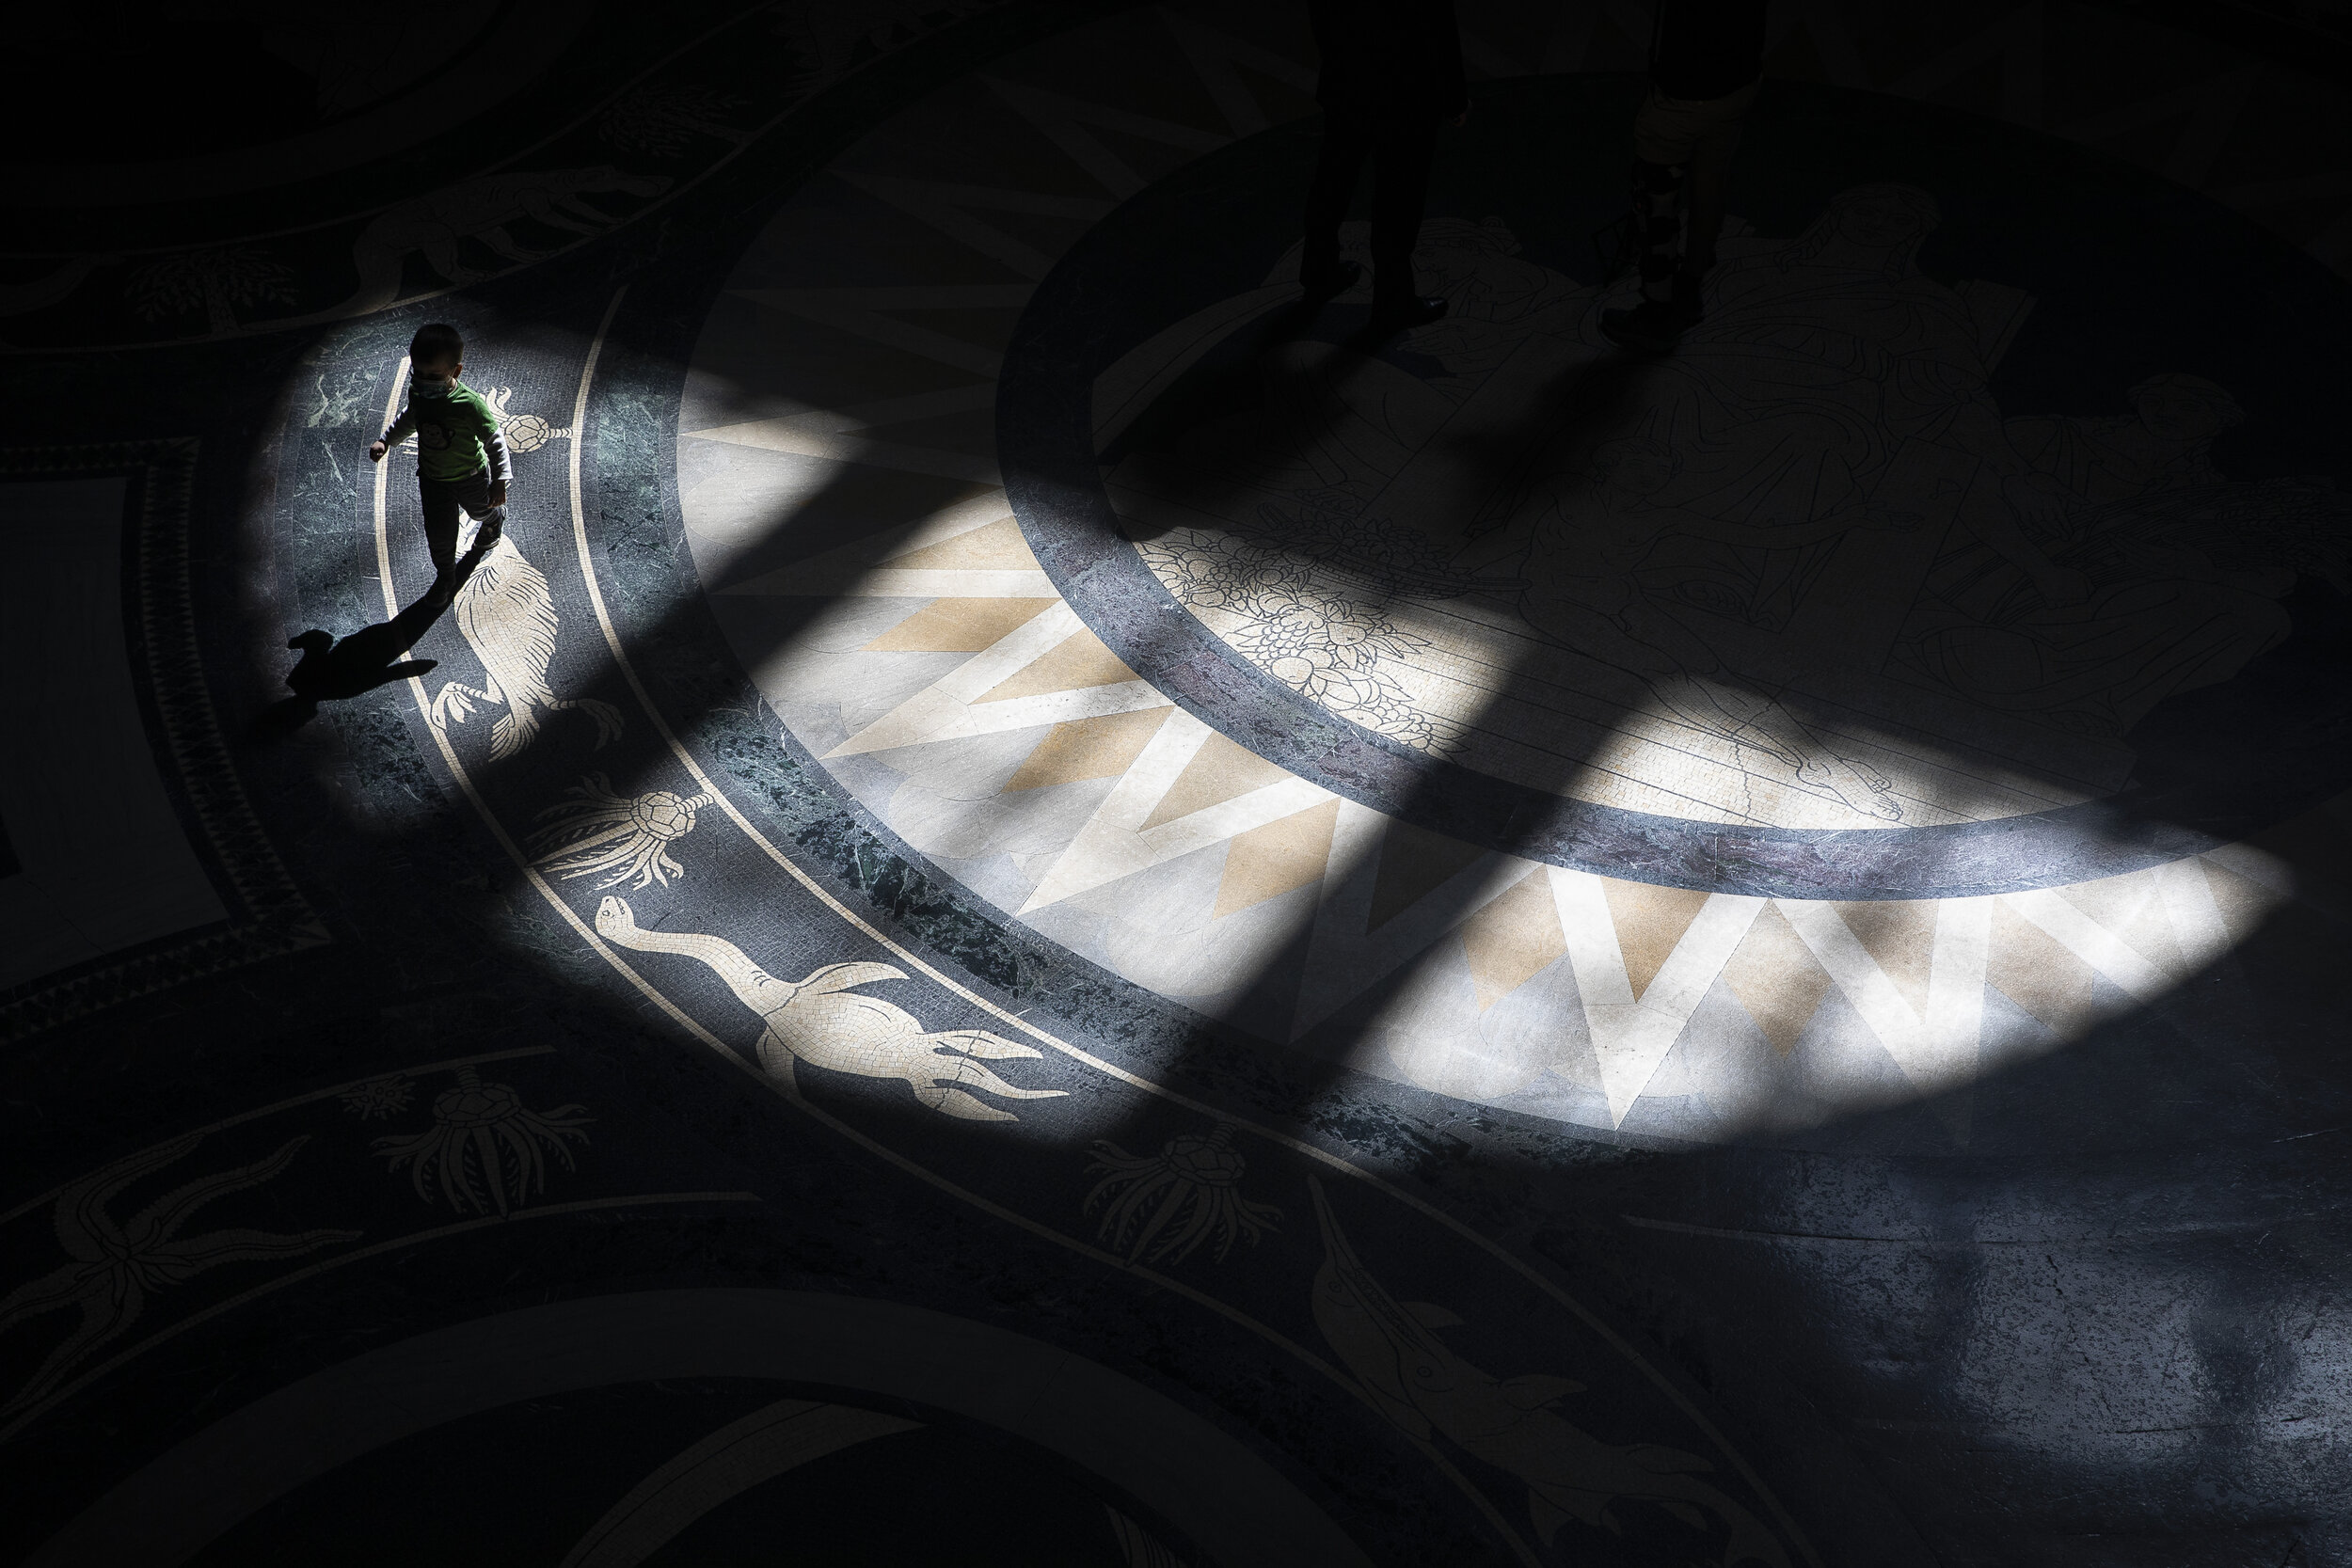  Three-year-old Quentin Deardden passes through a swath of light as he tours the inside of the Capitol rotunda with his family at the Nebraska State Capitol on Wednesday, March 10, 2021. KENNETH FERRIERA, Journal Star 